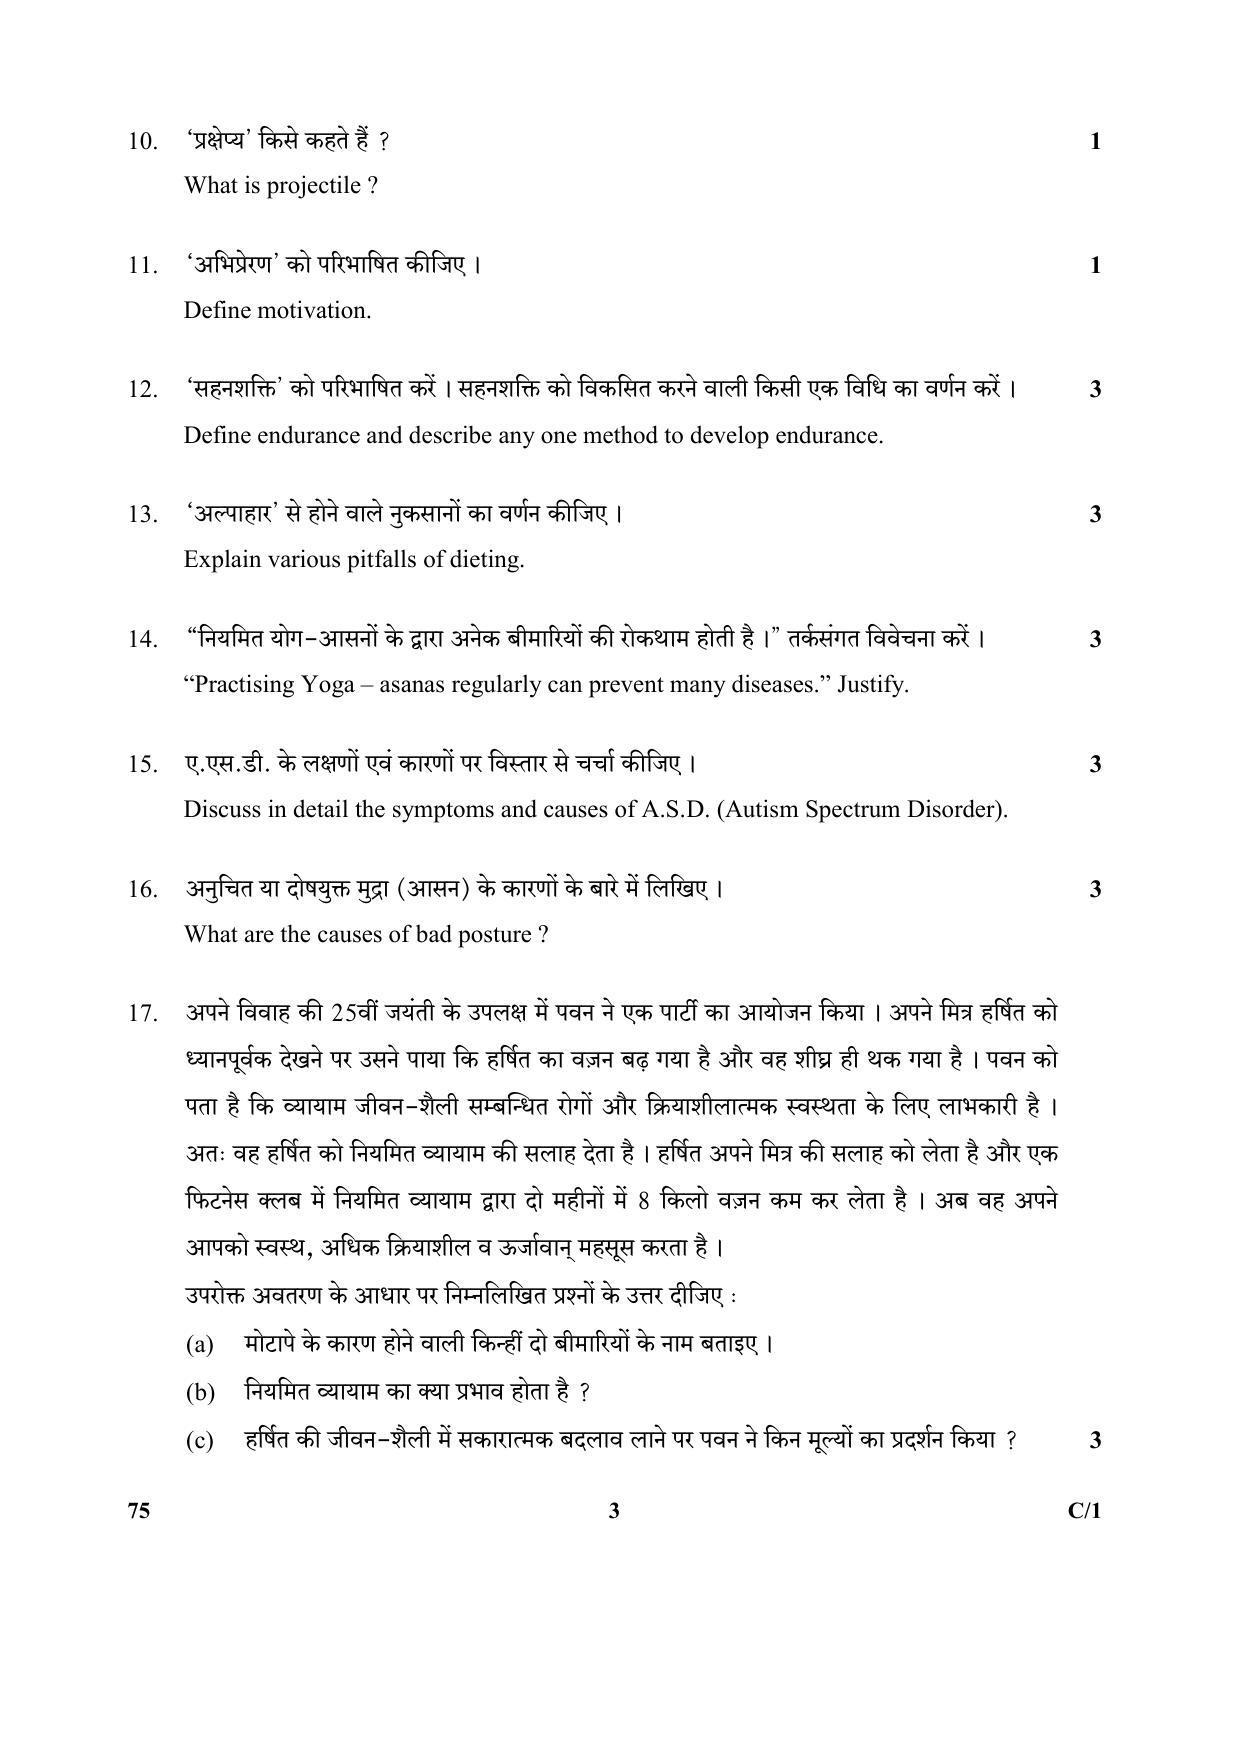 CBSE Class 12 225 & 75 (Physical Education Theory) 2018 Compartment Question Paper - Page 7